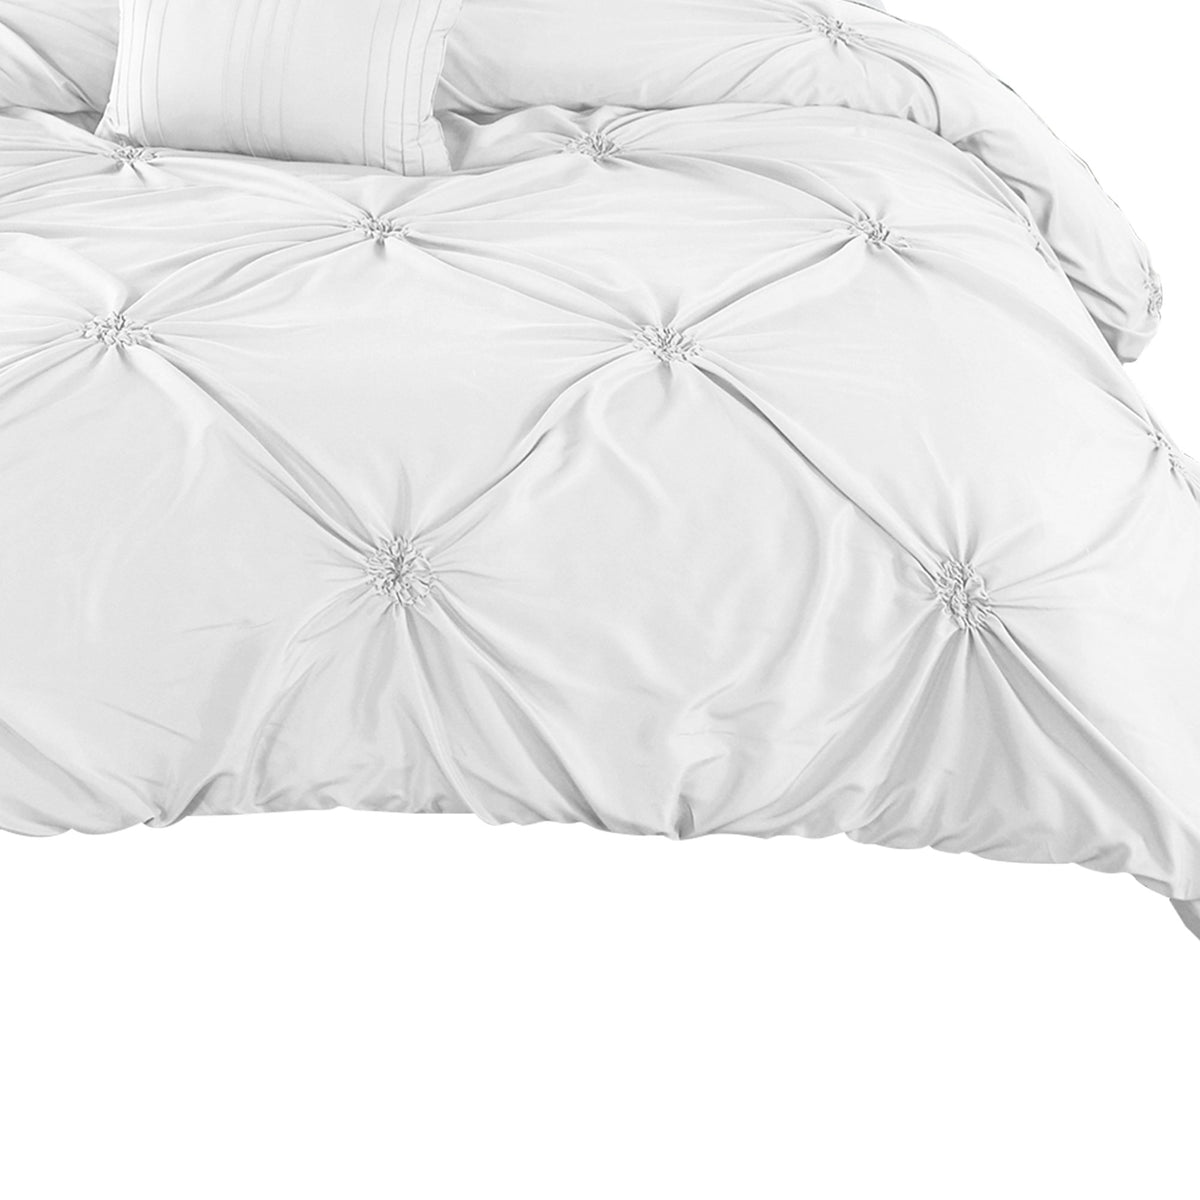 8 Piece Queen Polyester Comforter Set with Diamond Tufting, White - BM225186